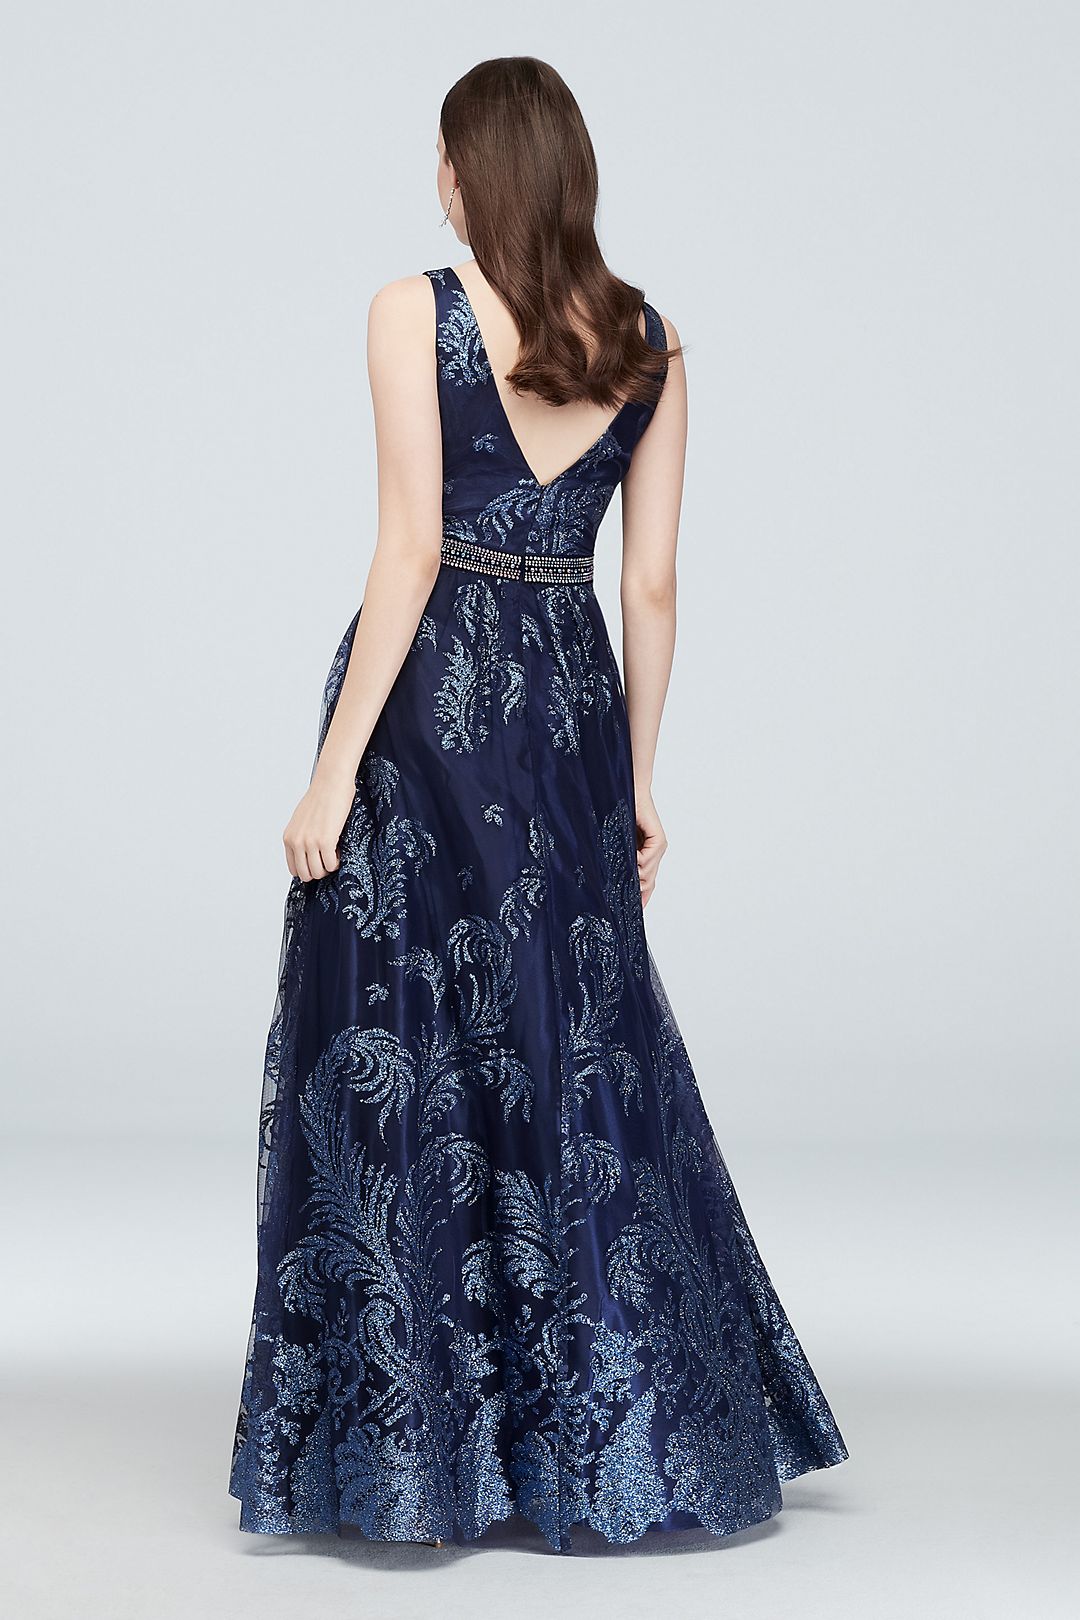 Belted Tulle Glitter Brocade Gown with Deep V-Neck Image 2